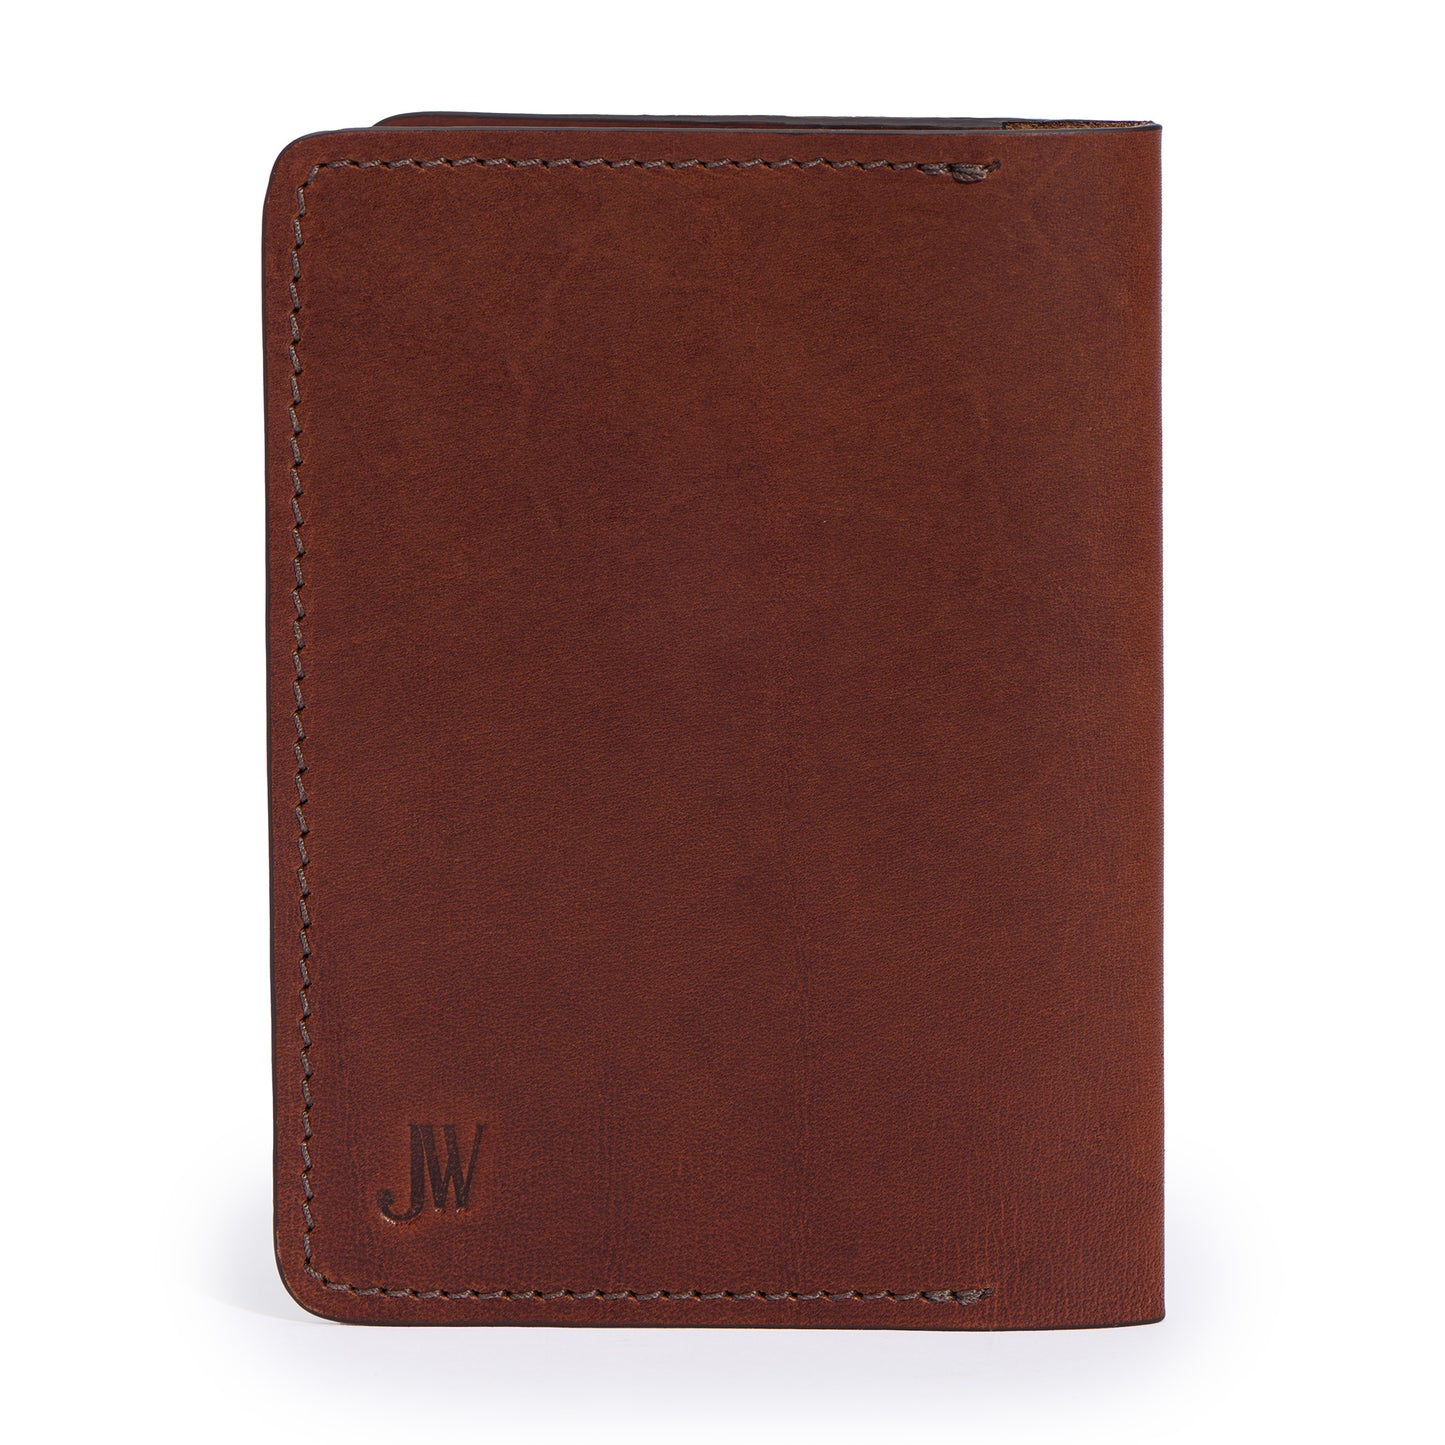 back for field notes journal in vintage brown leather by Jackson Wayne 